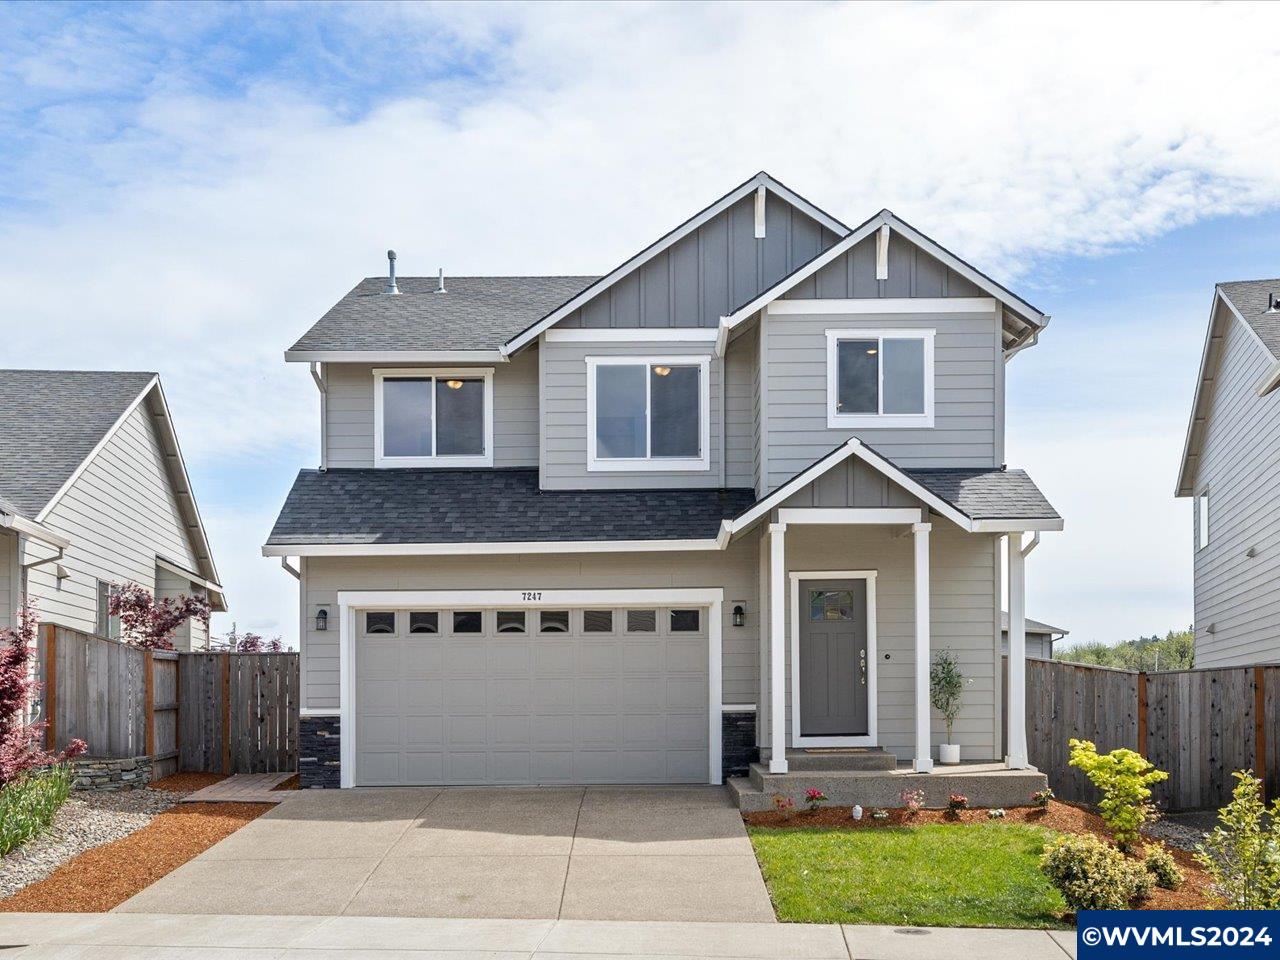 Welcome to this pristine 2020-built home in a newer neighborhood, nestled in a serene country-like setting just minutes from Albany and Corvallis. With 3 beds and 2.5 baths, and a total of 1555 sq ft, this residence features a modern interior, open-concept living, and a spacious primary suite. Enjoy outdoor gatherings in the freshly re-landscaped backyard. Experience the perfect blend of rural tranquility and urban convenience in this immaculate home.